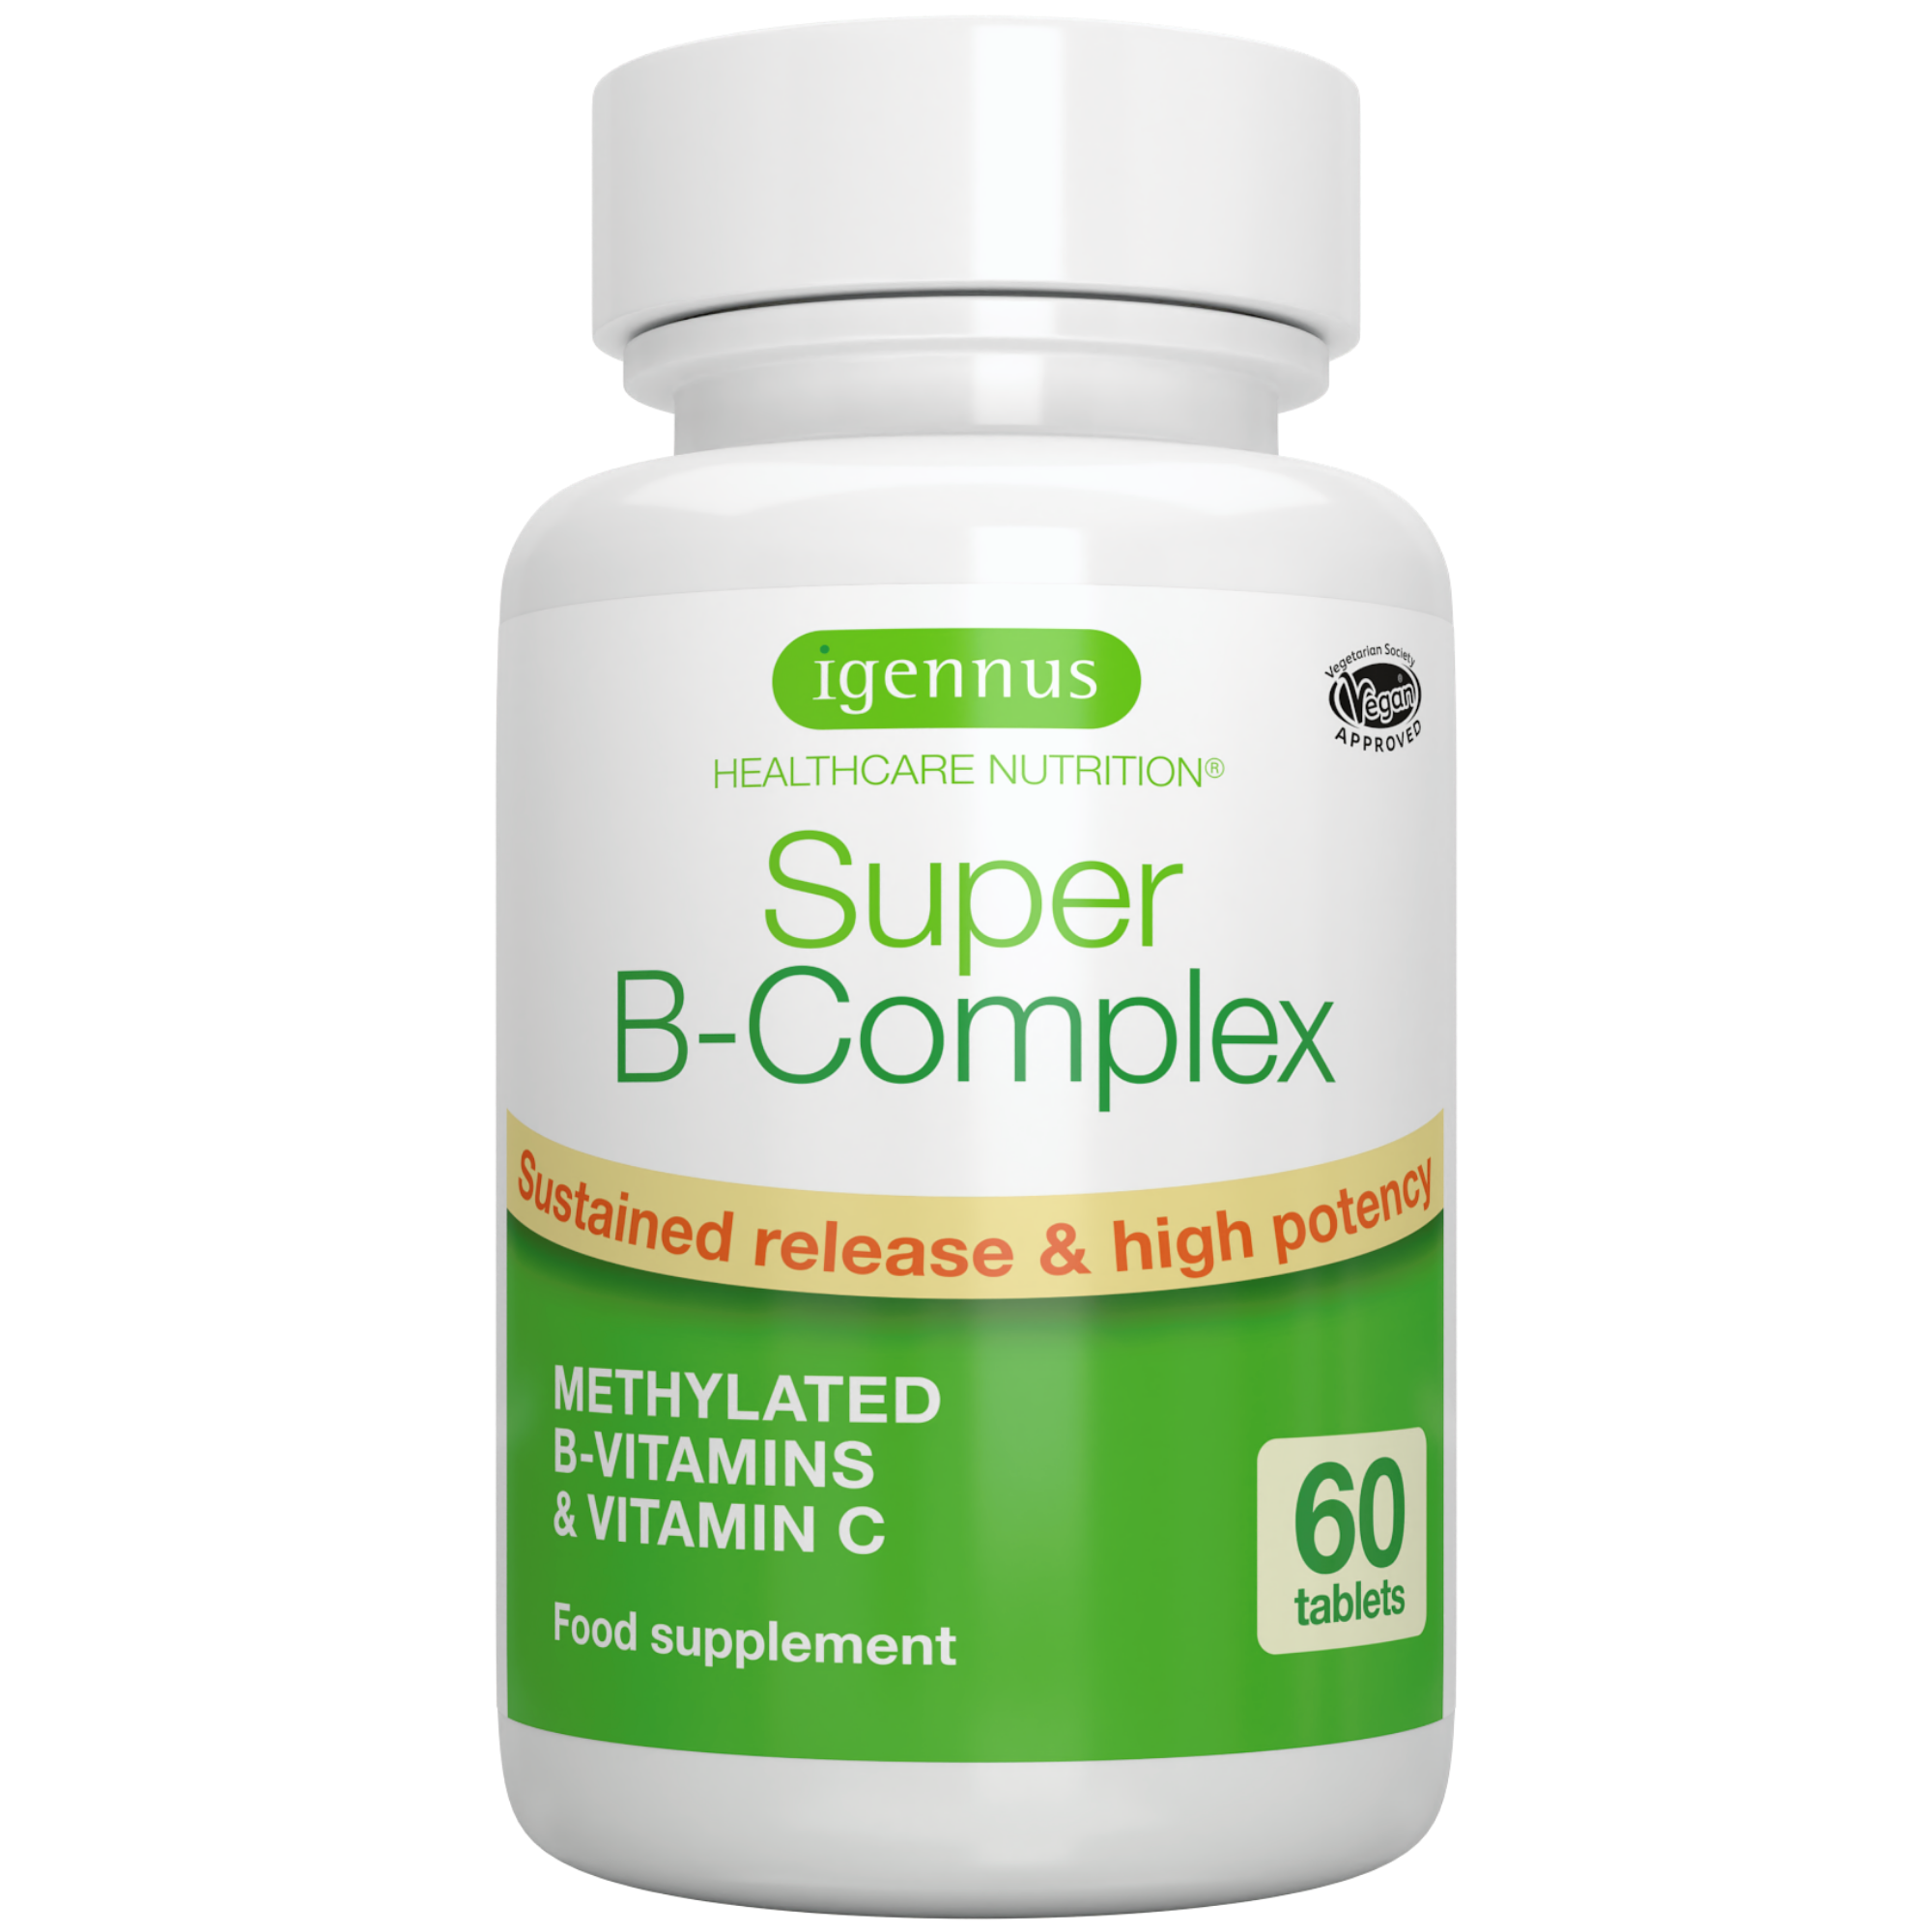 Super B-Complex  Methylated Vitamin B Complex tablets with folate –  Igennus Healthcare Nutrition